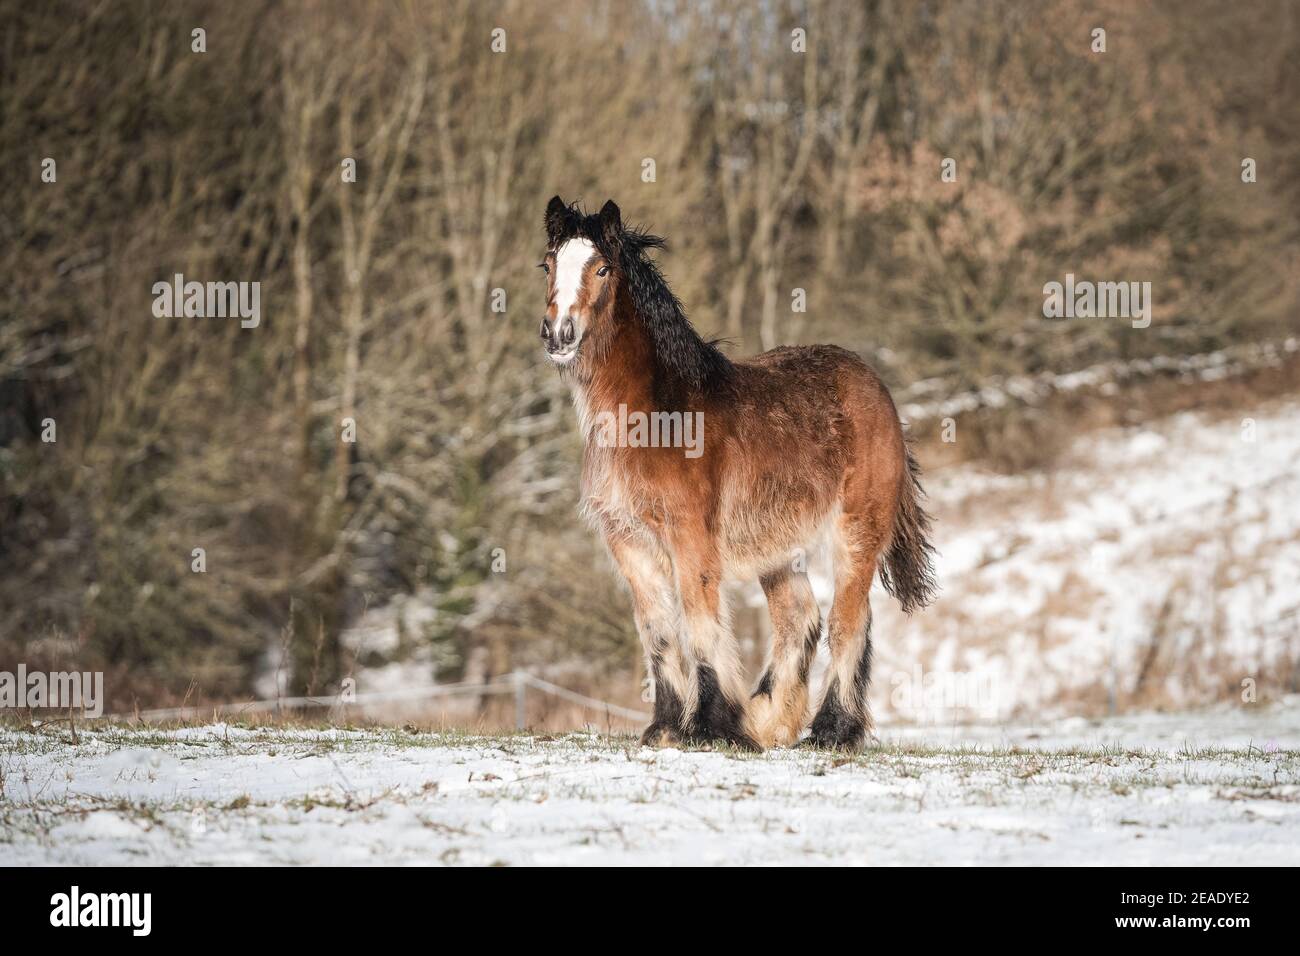 Beautiful big Irish Gypsy Cob horse foal standing wild in snow field on ground looking towards camera through cold deep snowy winter landscape alone Stock Photo